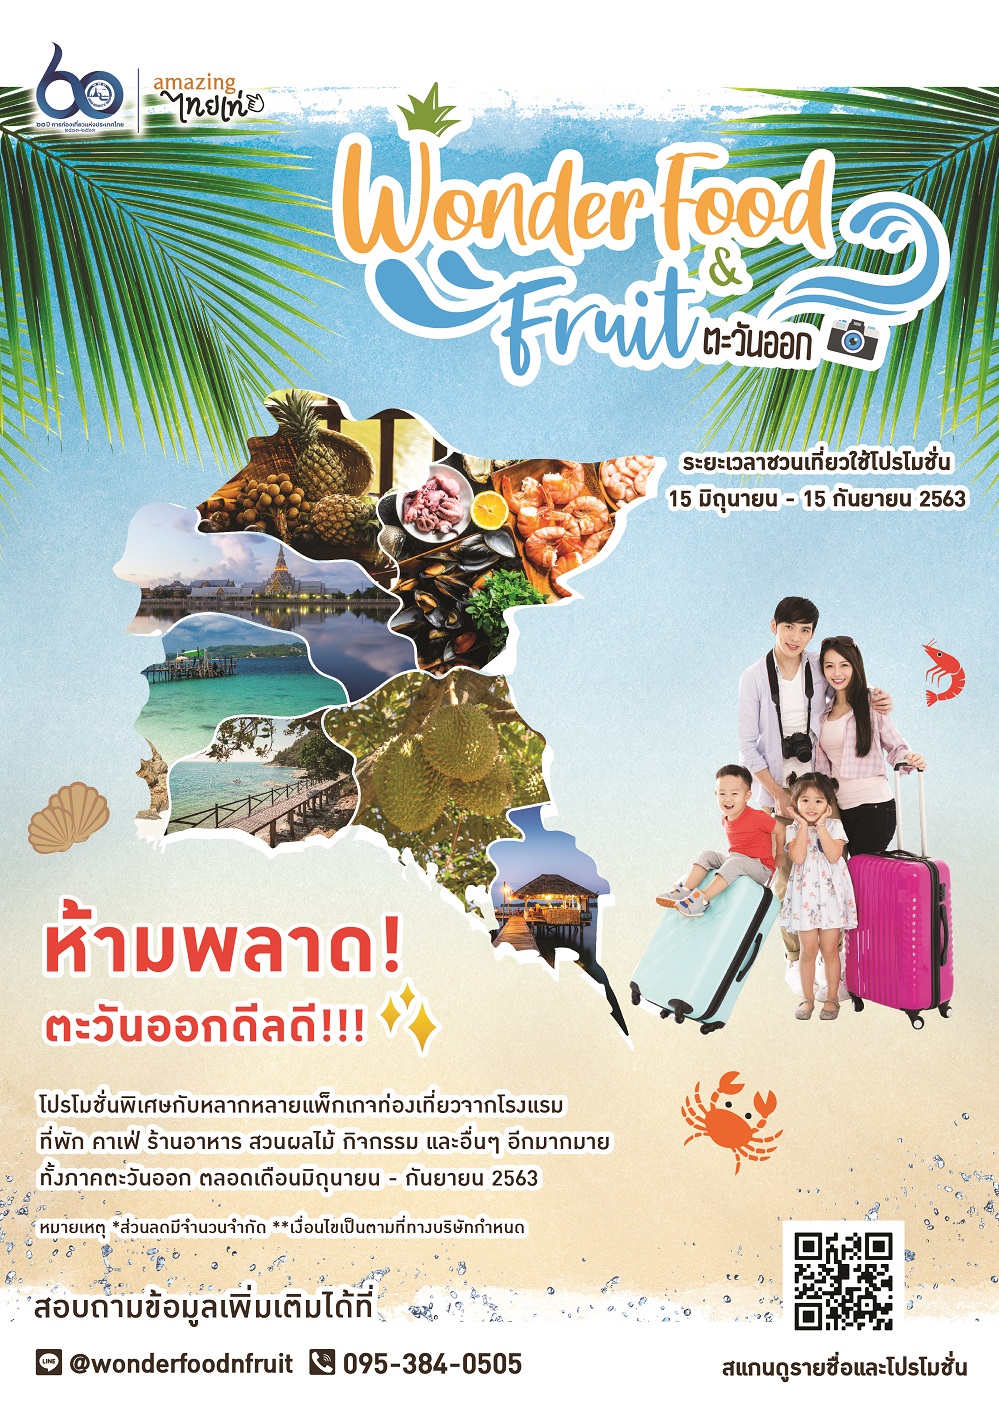 Tourism Authority of Thailands adopts online tactics to promote 'Wonder Food Fruit of the East